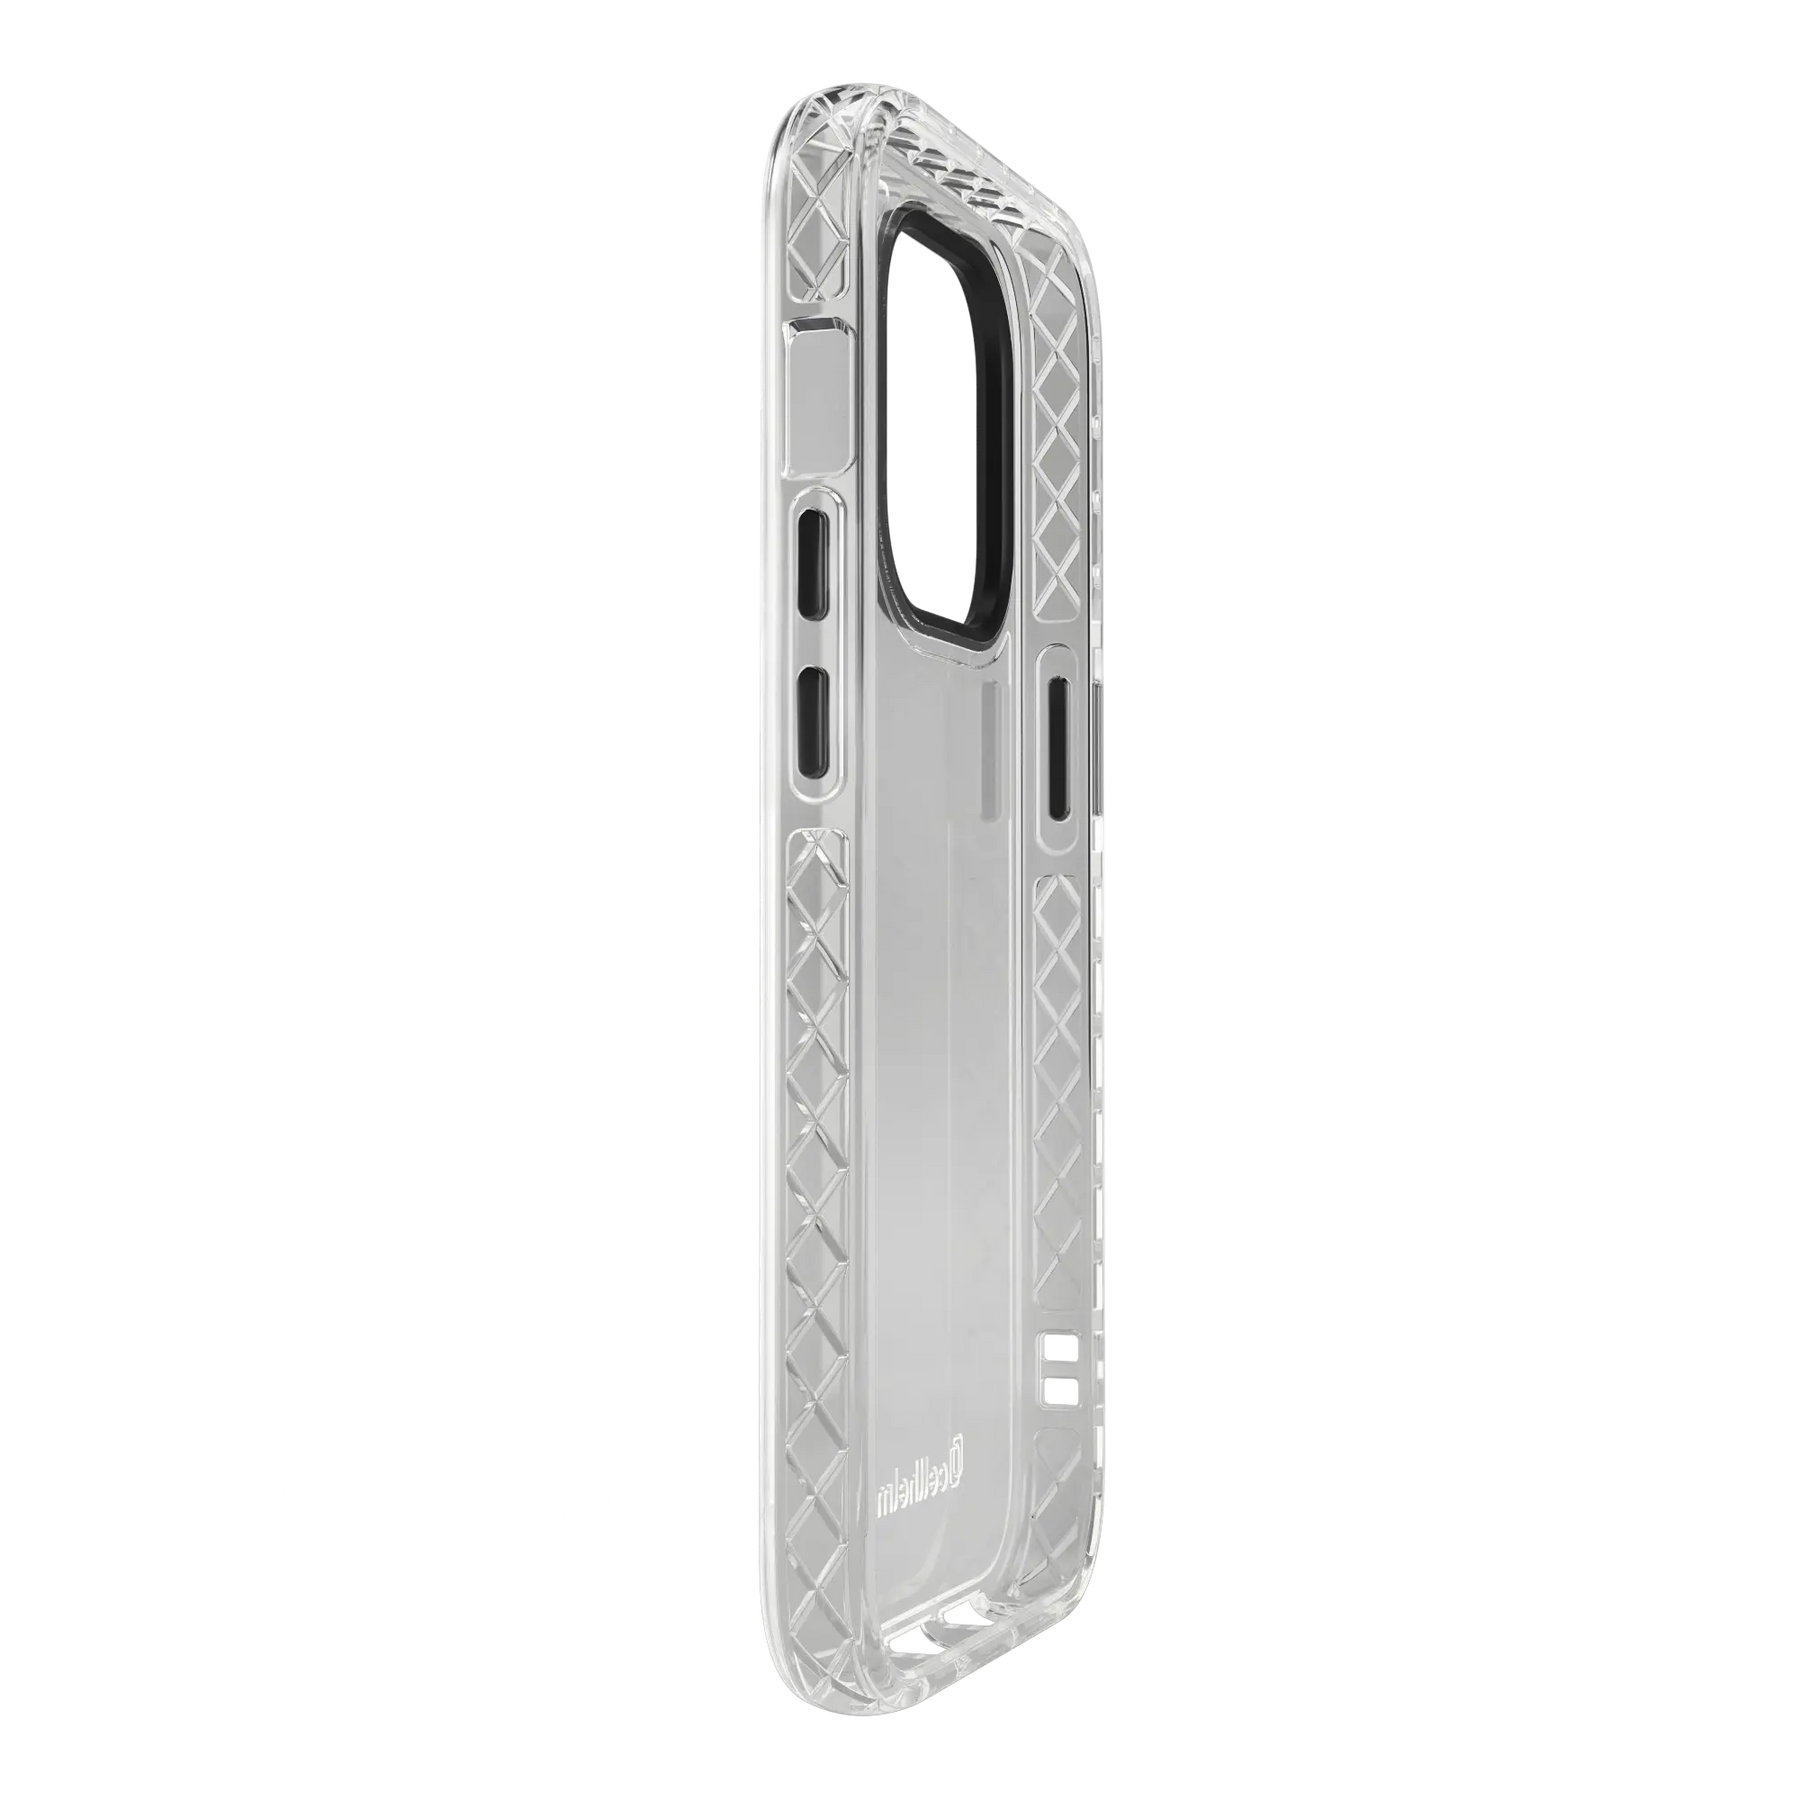 Altitude X Series for iPhone 14 Pro (6.1") 2022 (Crystal Clear) - Case -  - cellhelmet